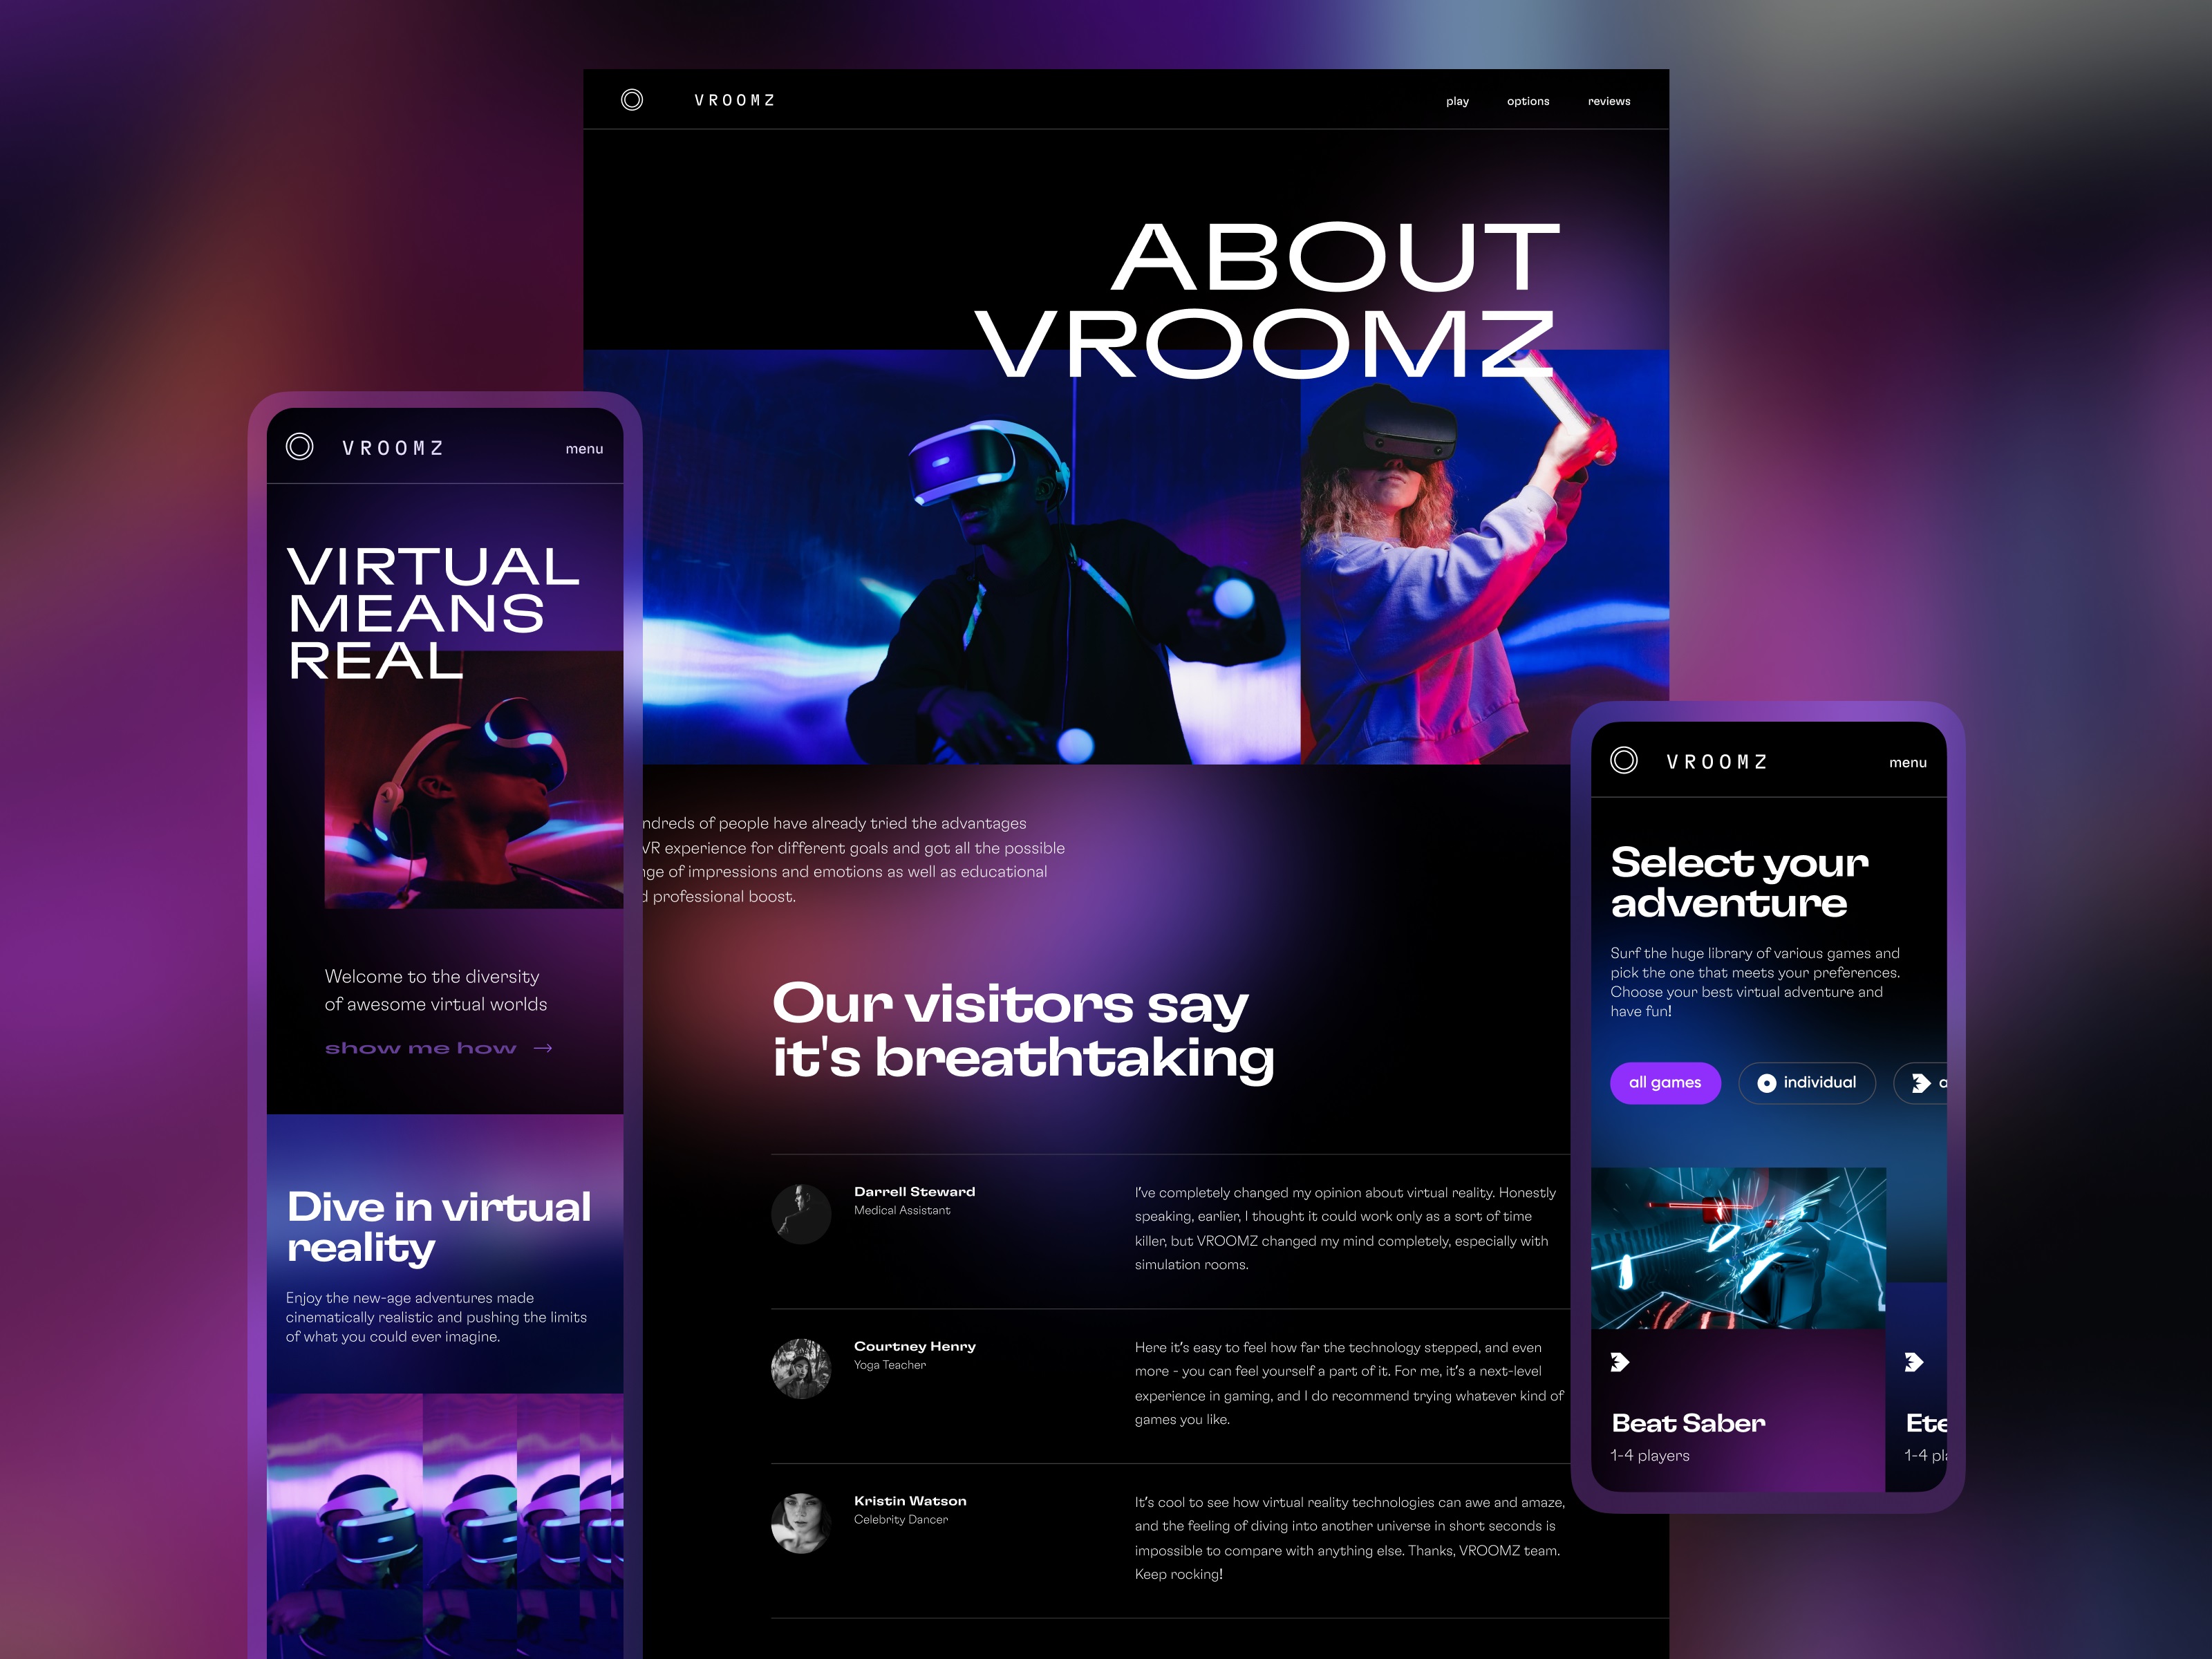 VR rooms wesite about page tubik design